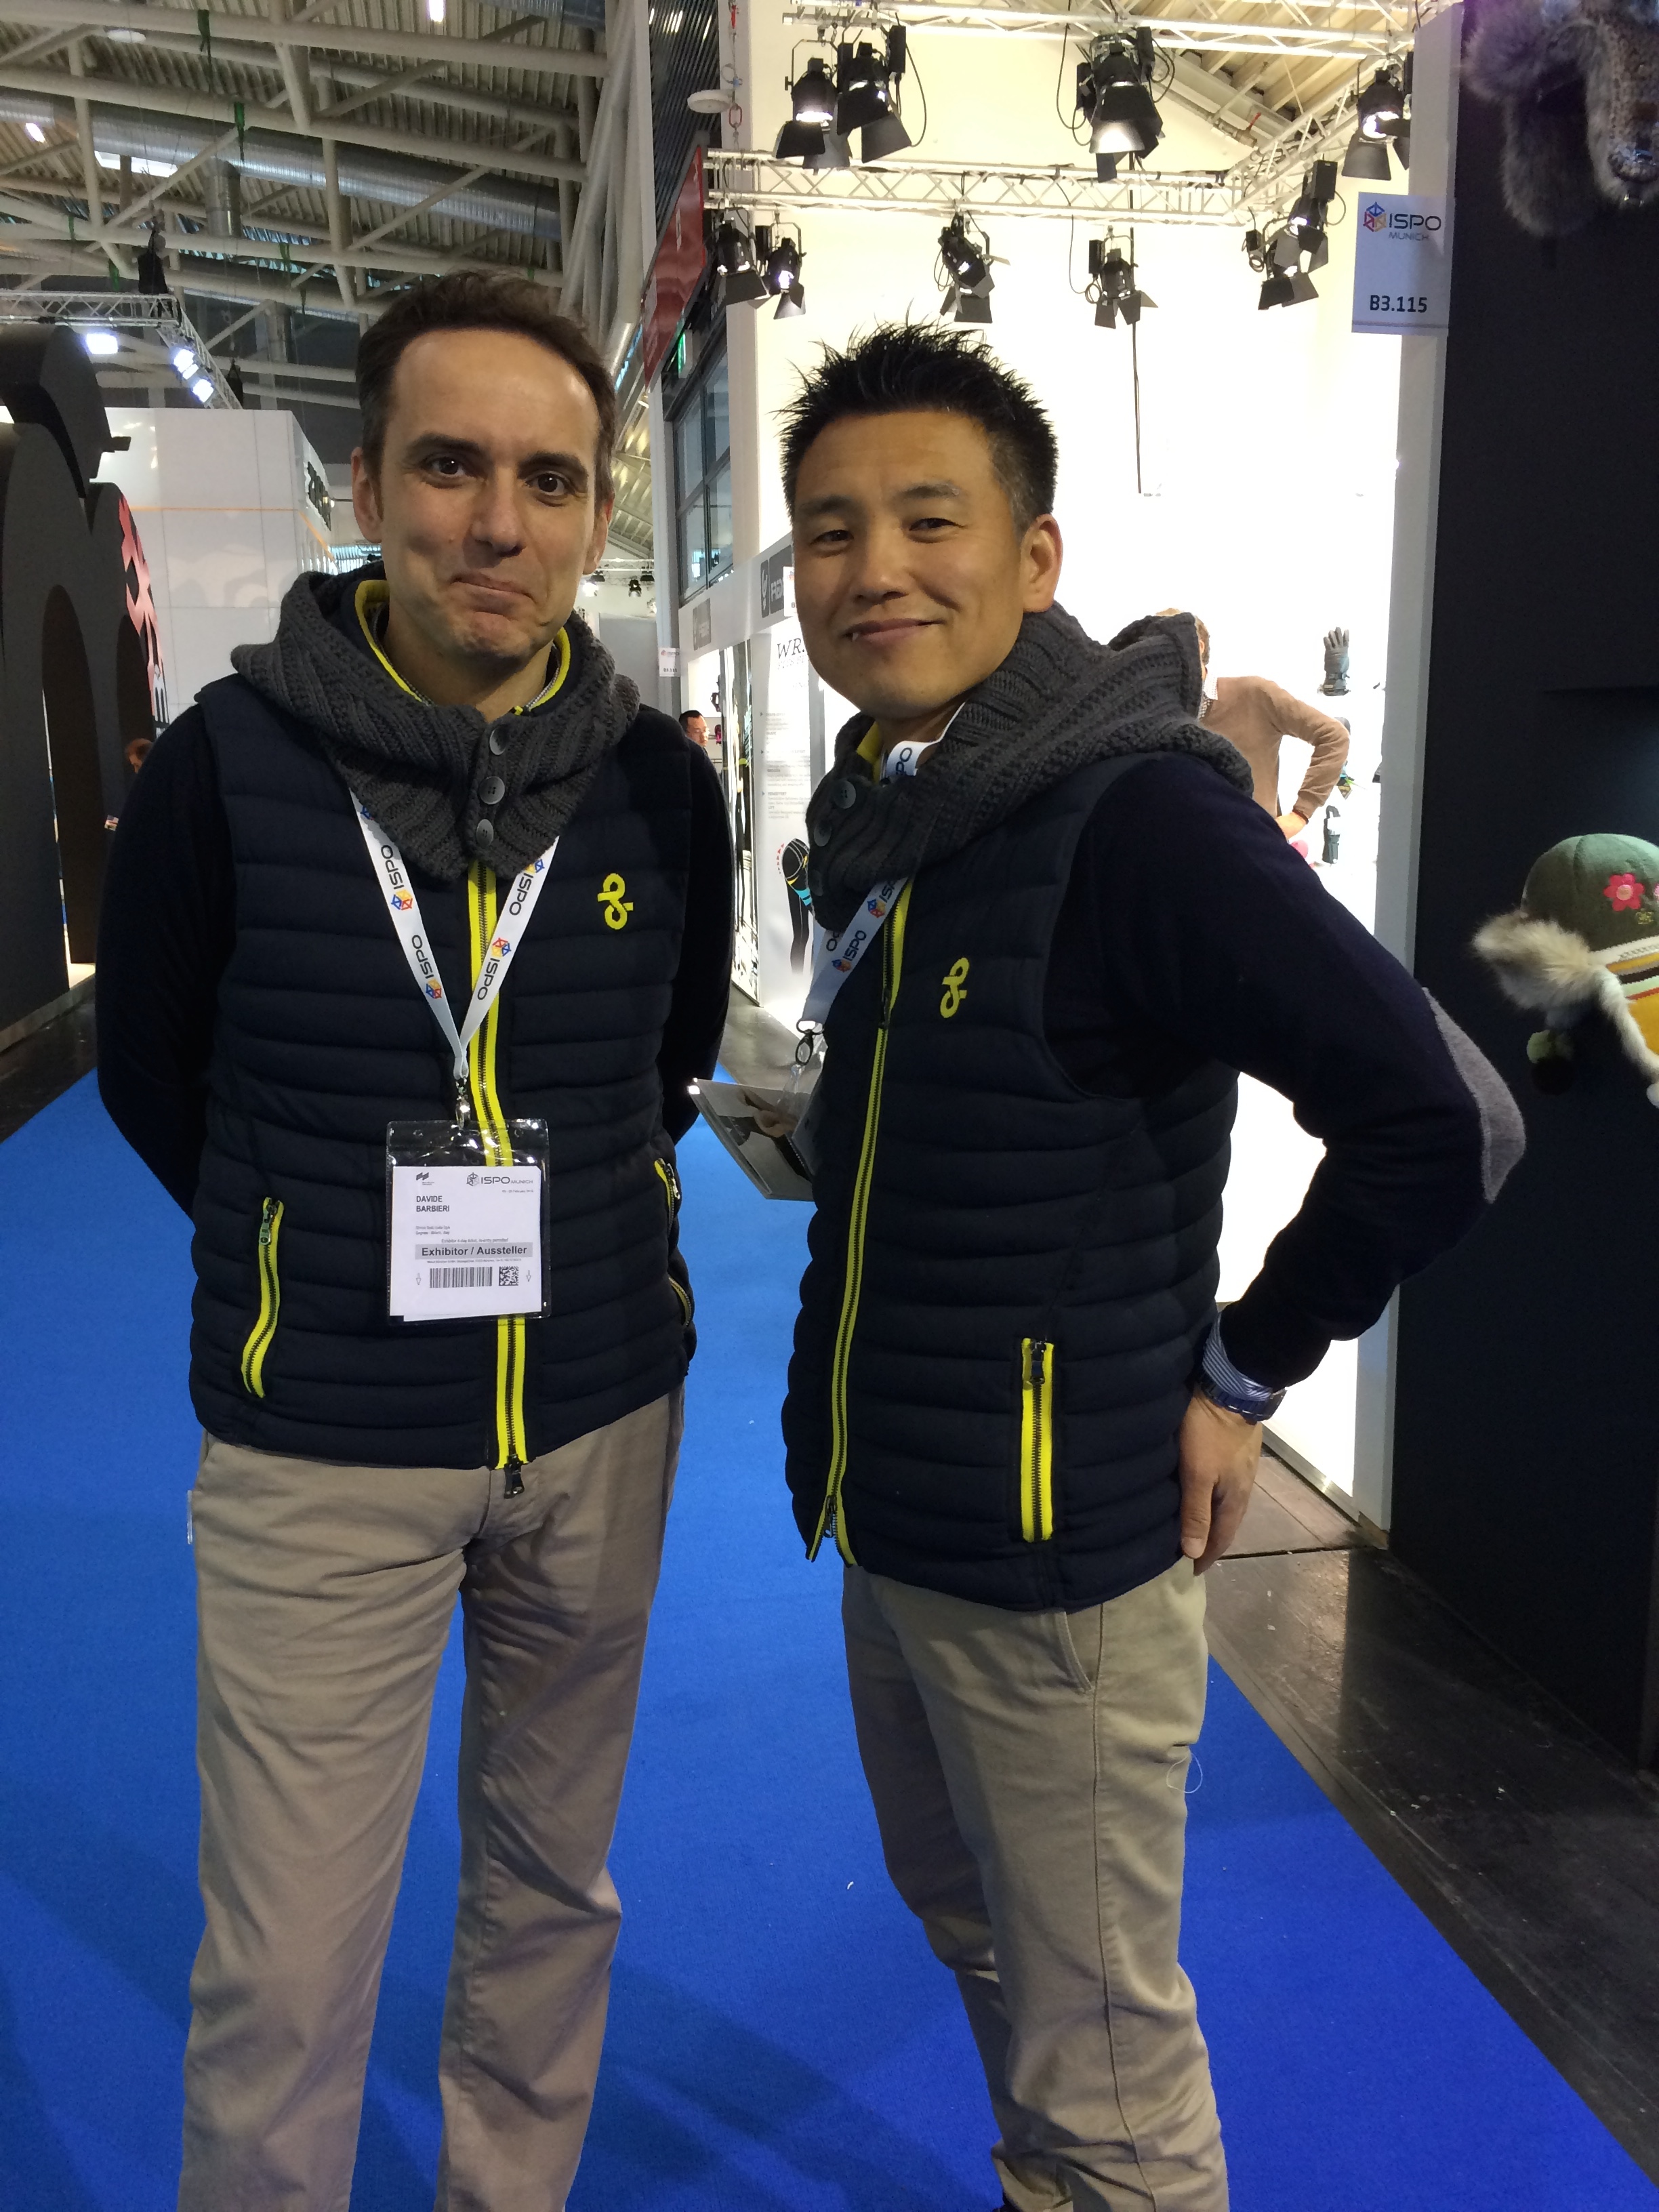 ‘Quilted gilet’ from Shima Seiki Italia, modelled by Davide Barbiere and Nobby Sasamoto.